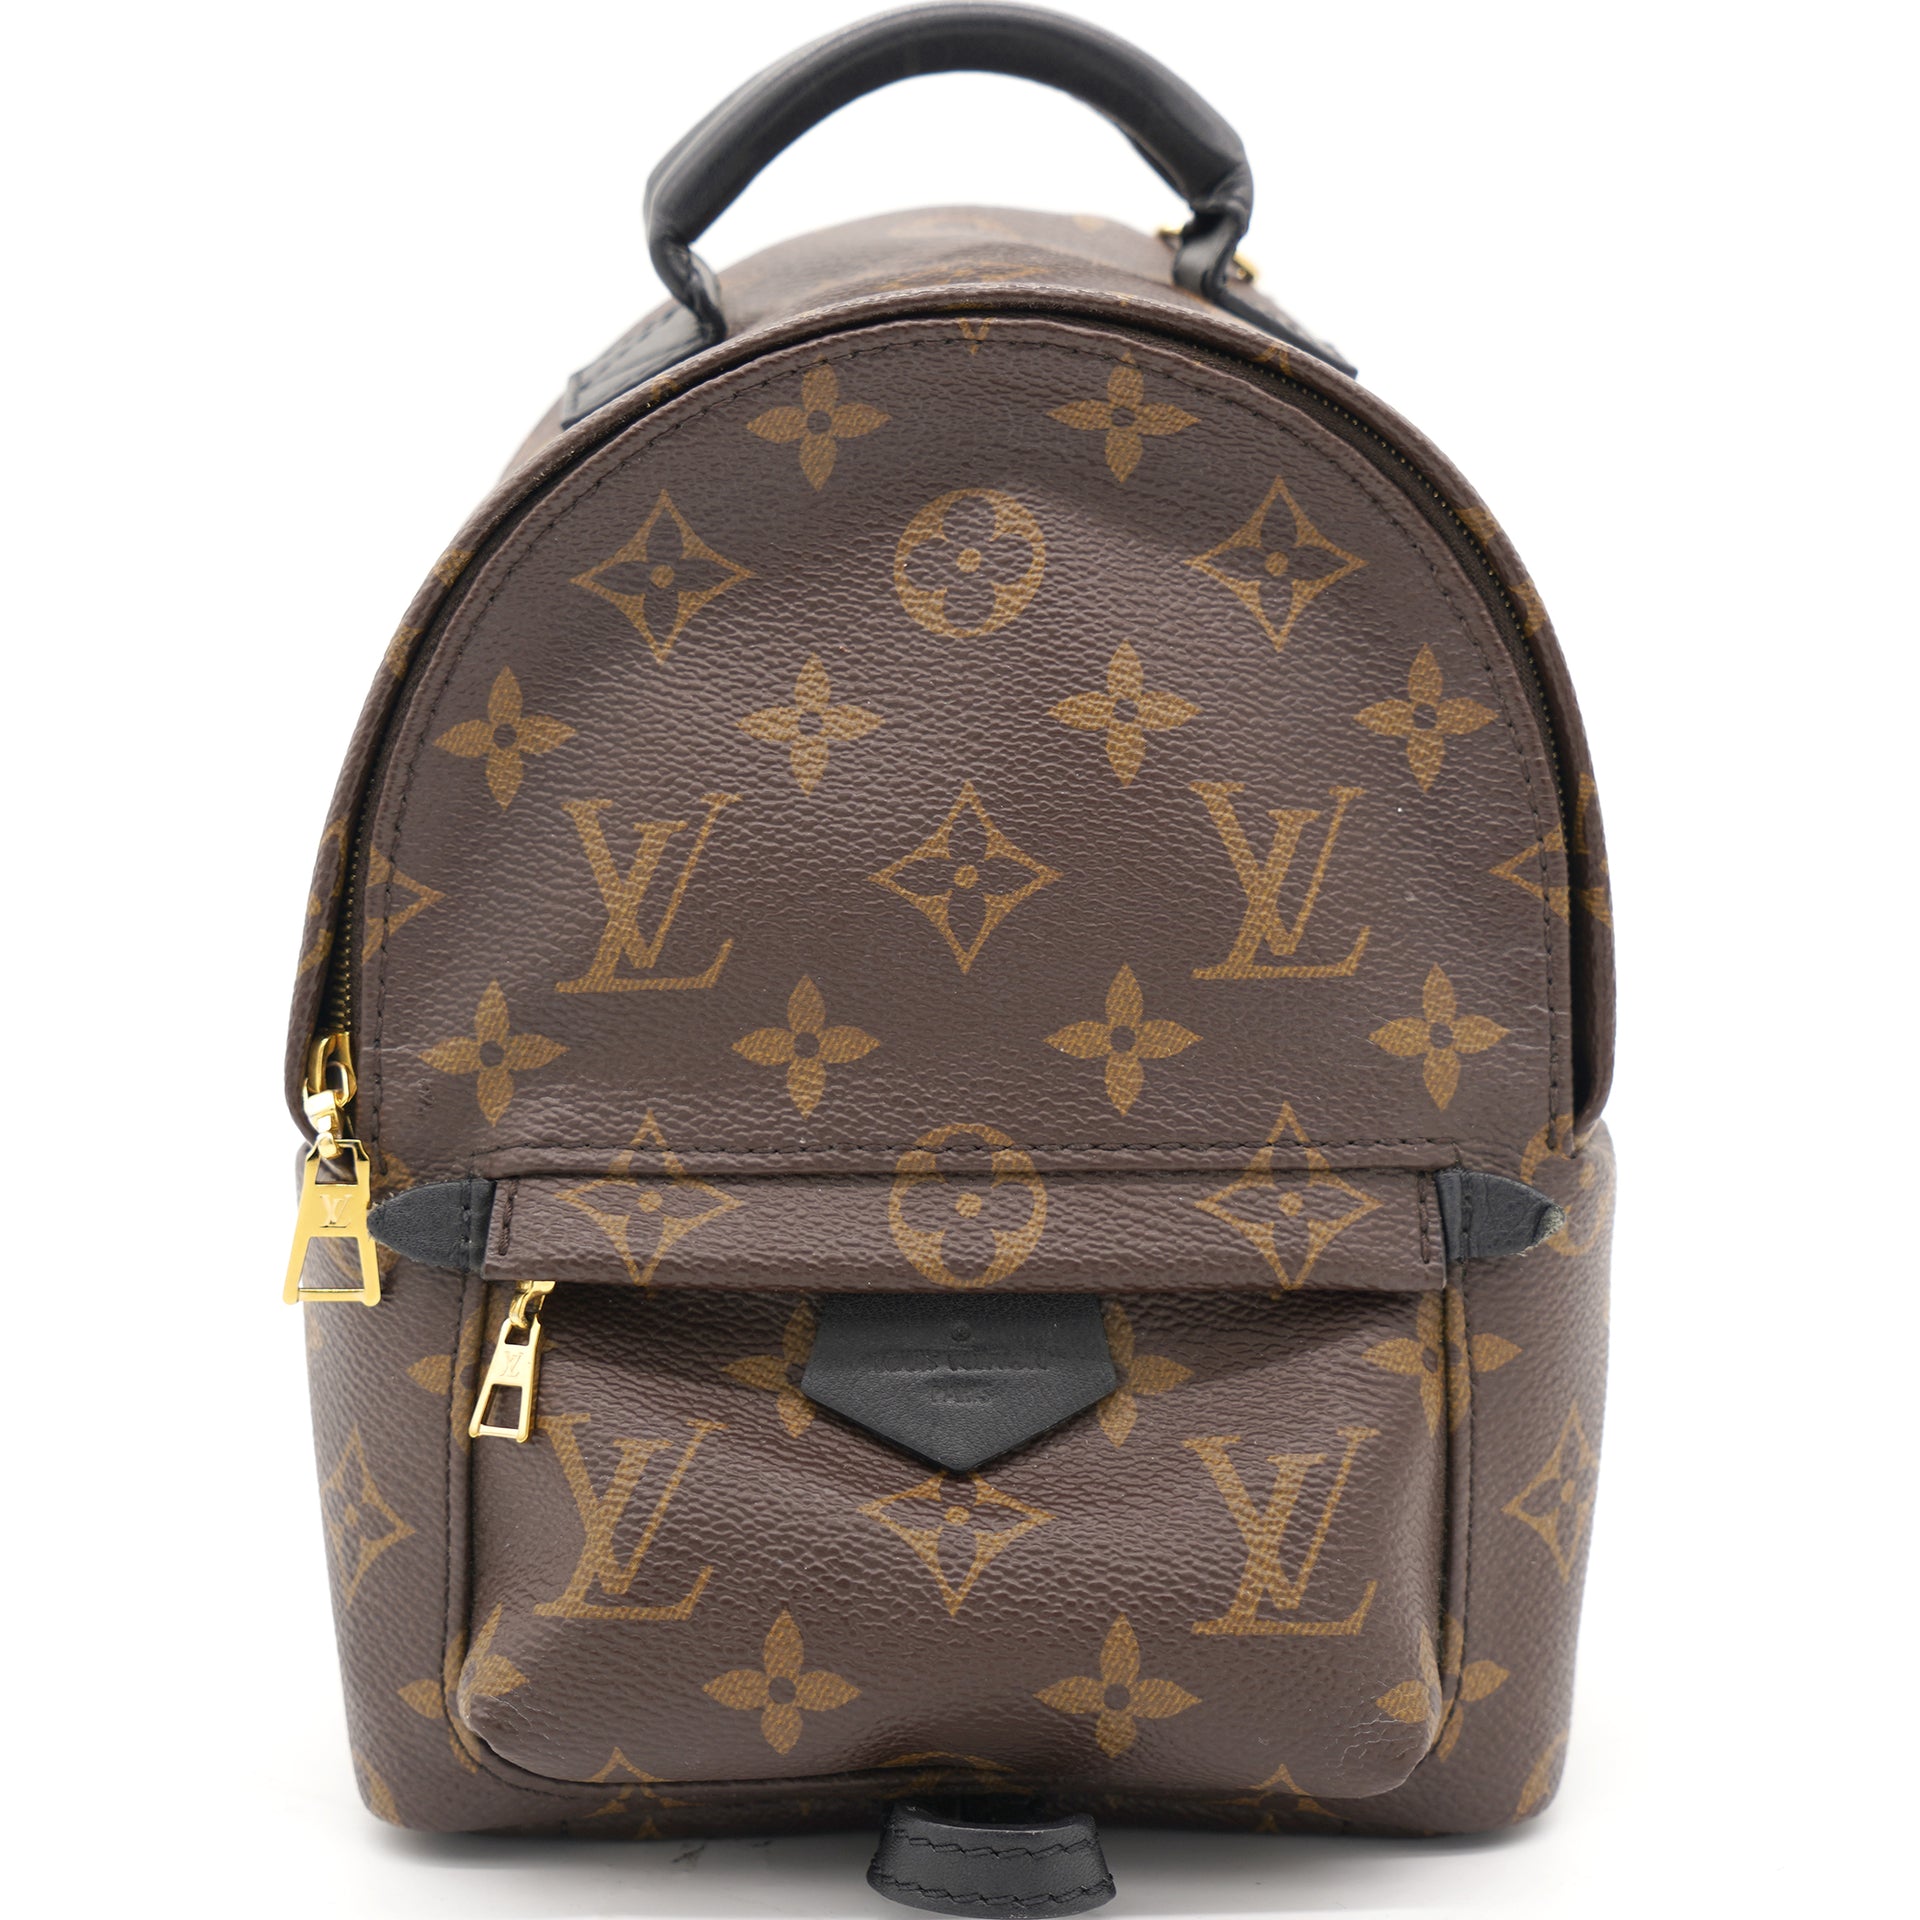 Louis Vuitton Women's Backpacks, Authenticity Guaranteed